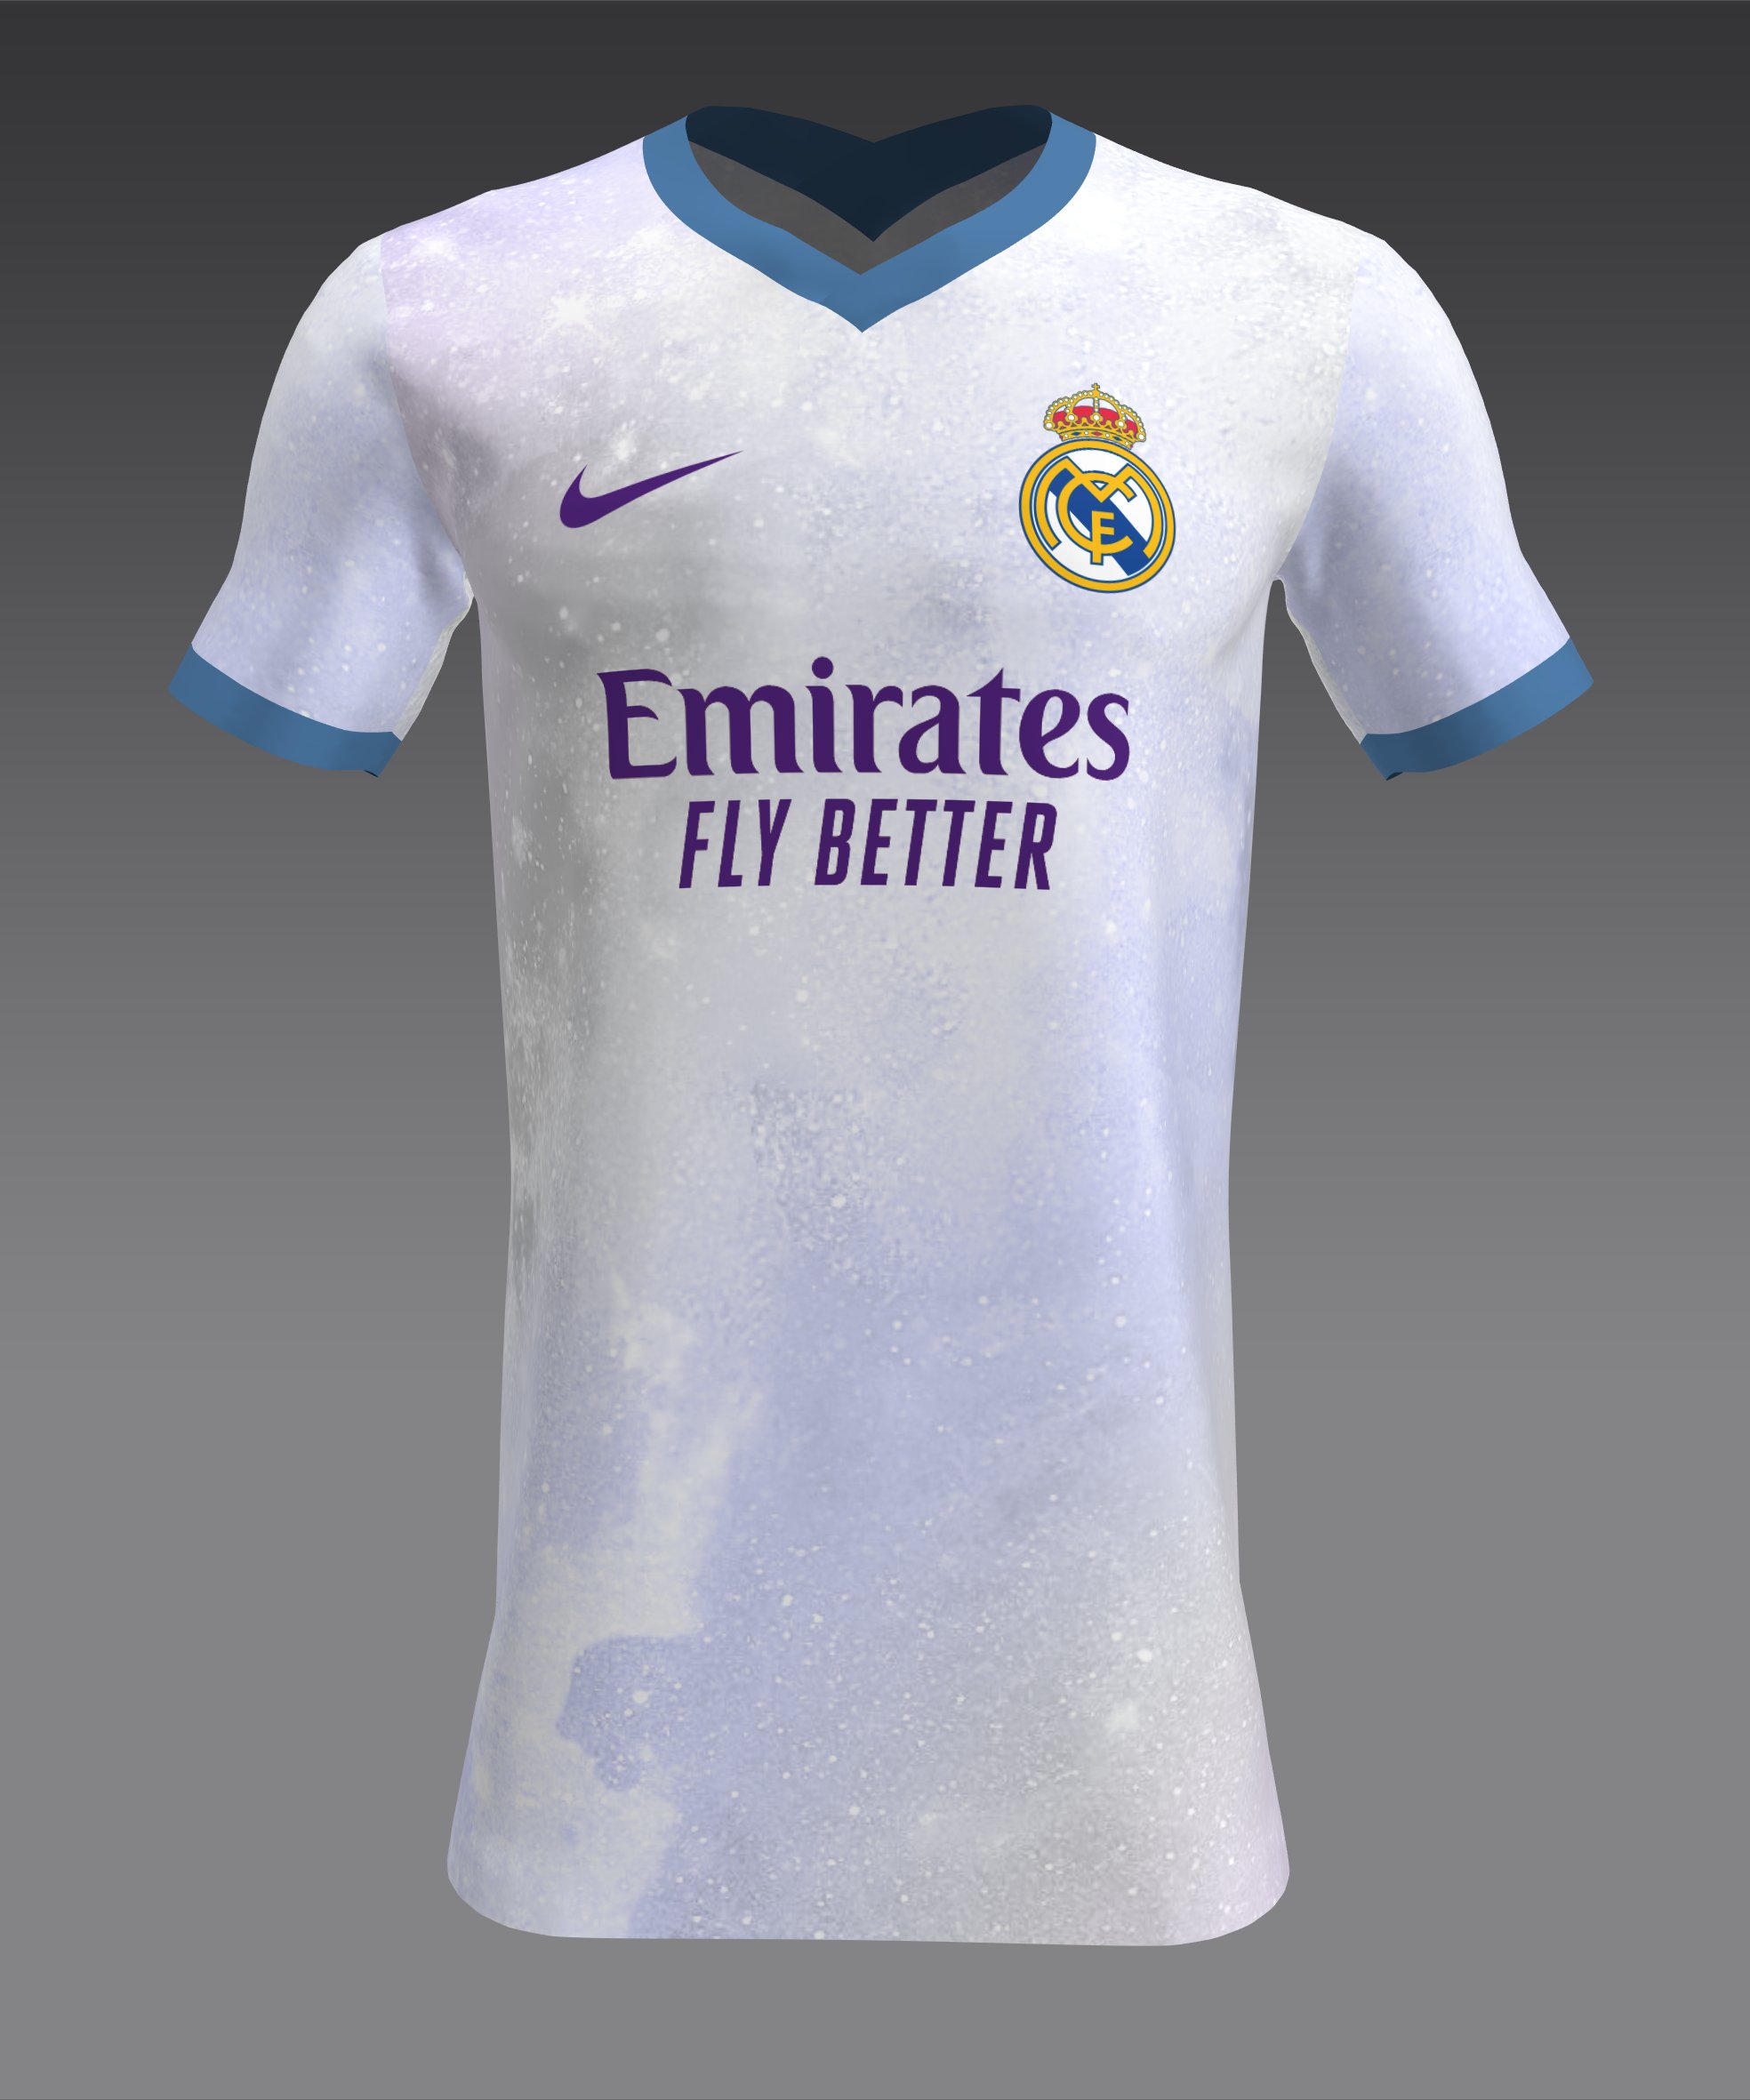 Jack Henderson on Twitter: "Made a Nike/Real Madrid concept home kit... I know, I know, original. https://t.co/RCRK0Qnem8" / Twitter